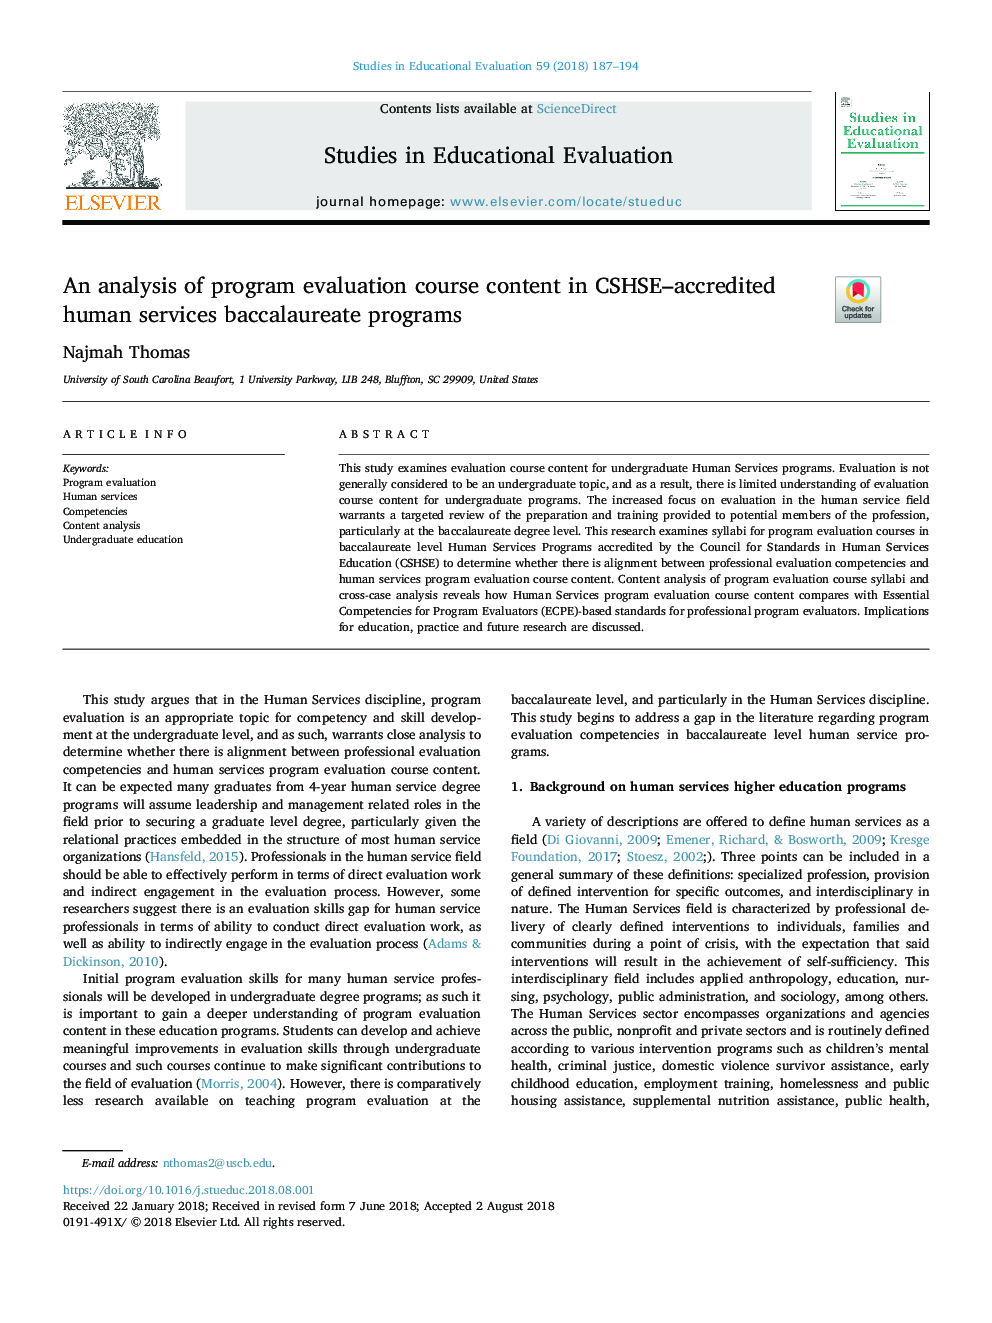 An analysis of program evaluation course content in CSHSE-accredited human services baccalaureate programs